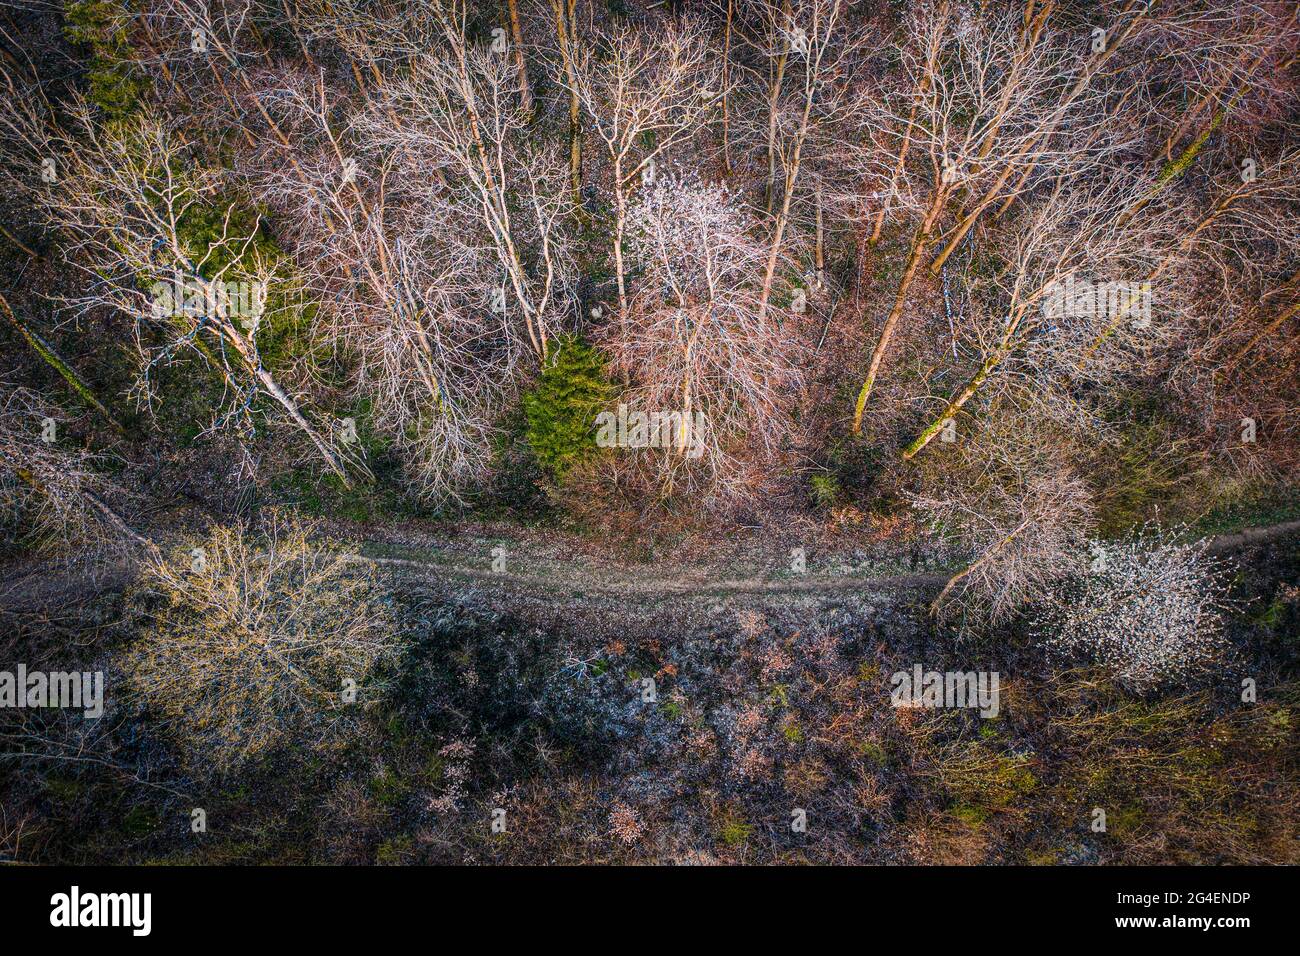 aerial view of a trail passing through a deciduous forest in early spring Stock Photo